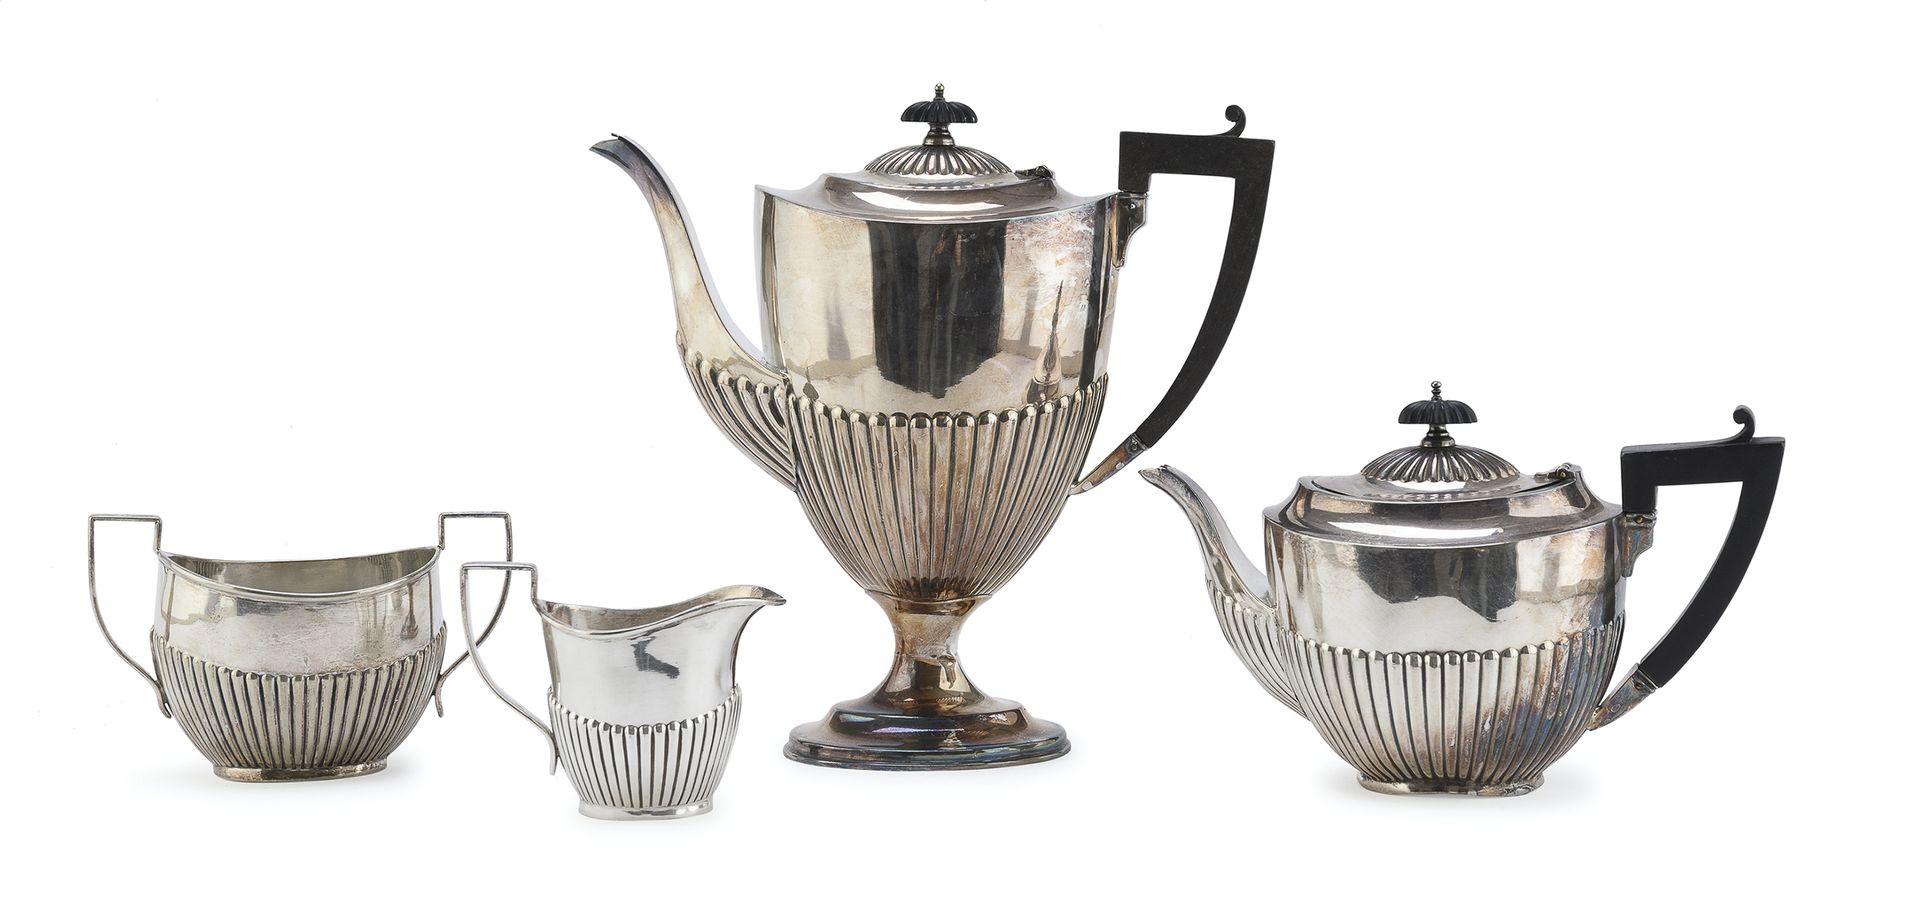 Null SILVER-PLATED TEA SET, UK EARLY 20TH CENTURY